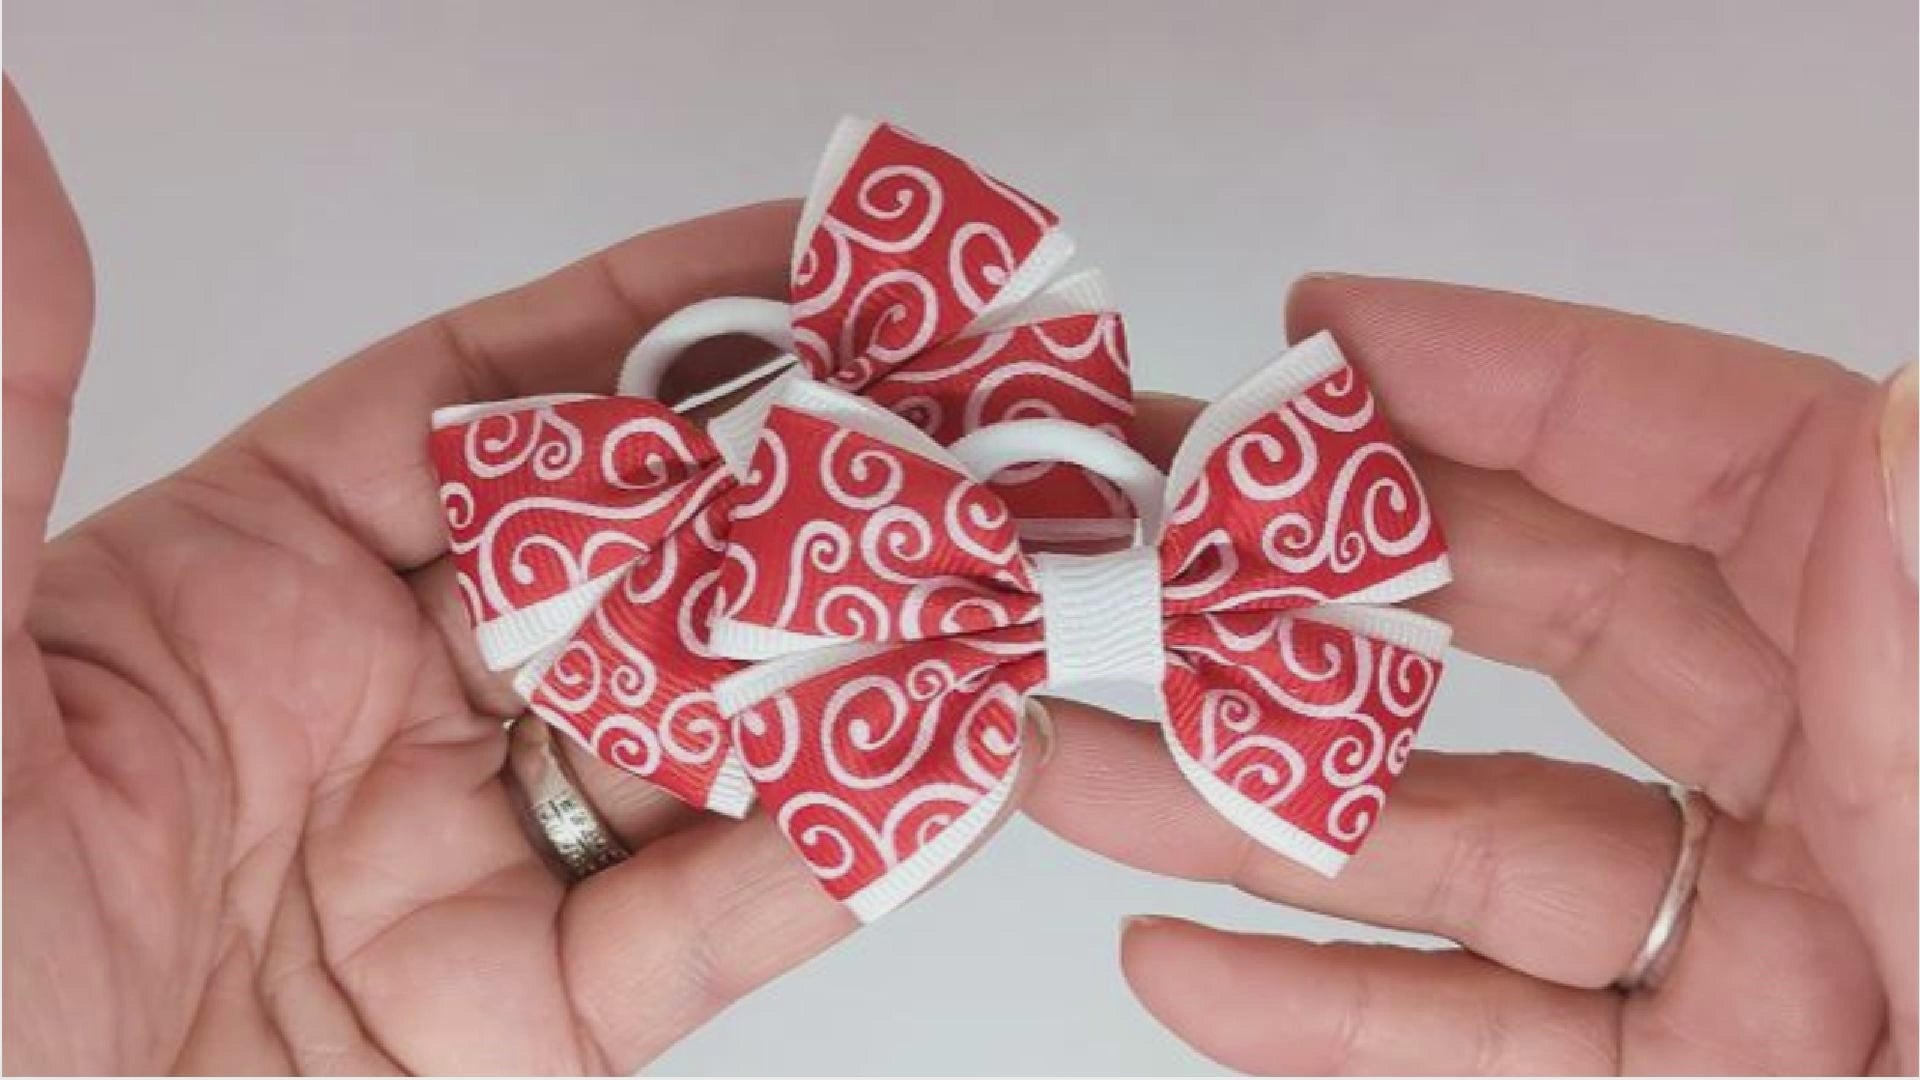 Red and White Novelty Design Hair Bows on Soft Polyester Bobbles | Unique One-of-a-Kind Designs